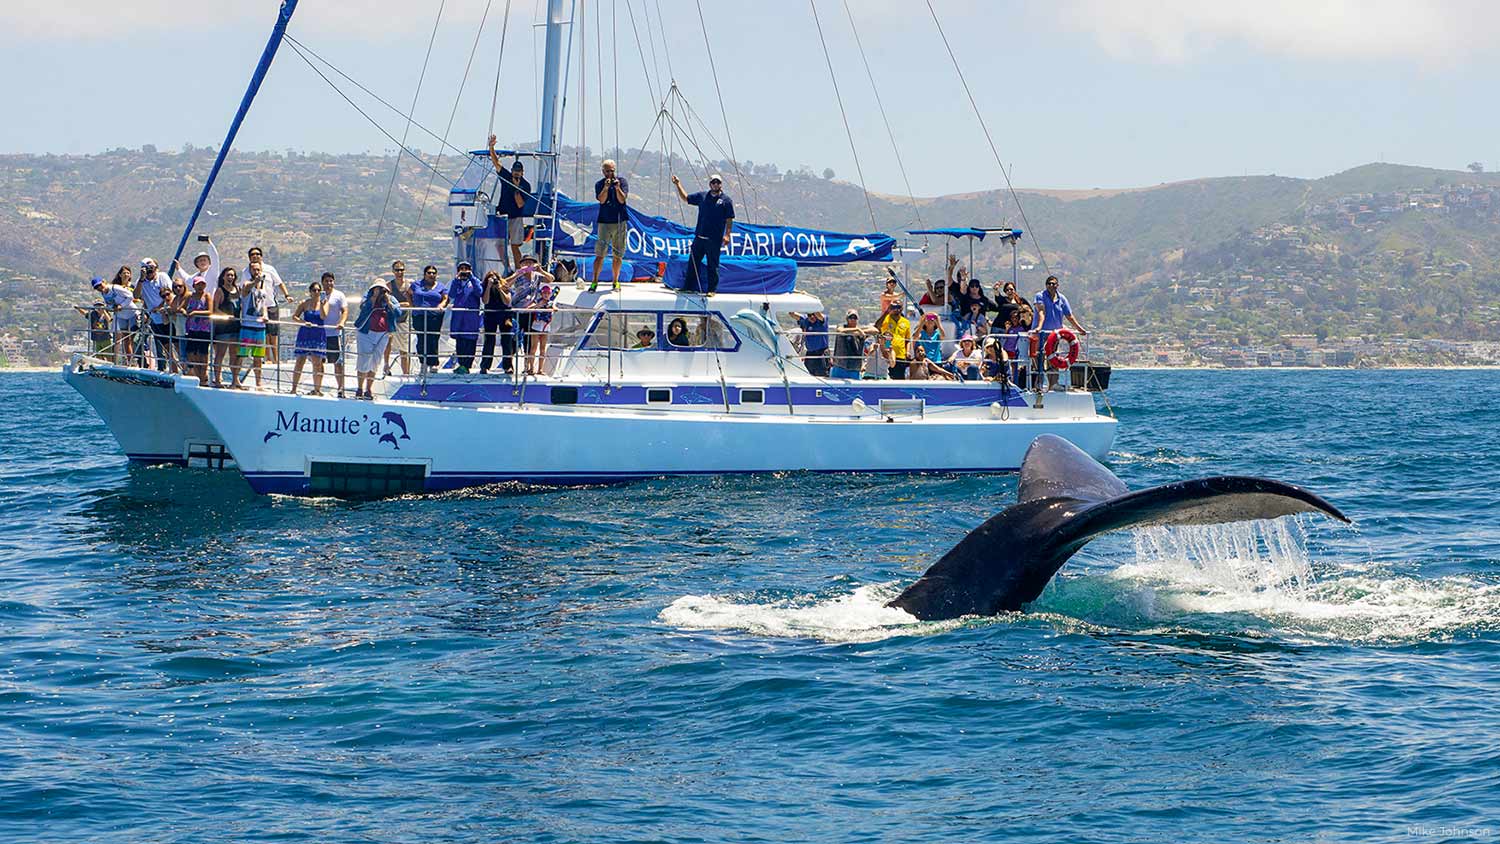 Capt. Dave's Whale Watching Safari - Dana Point Whale Watching